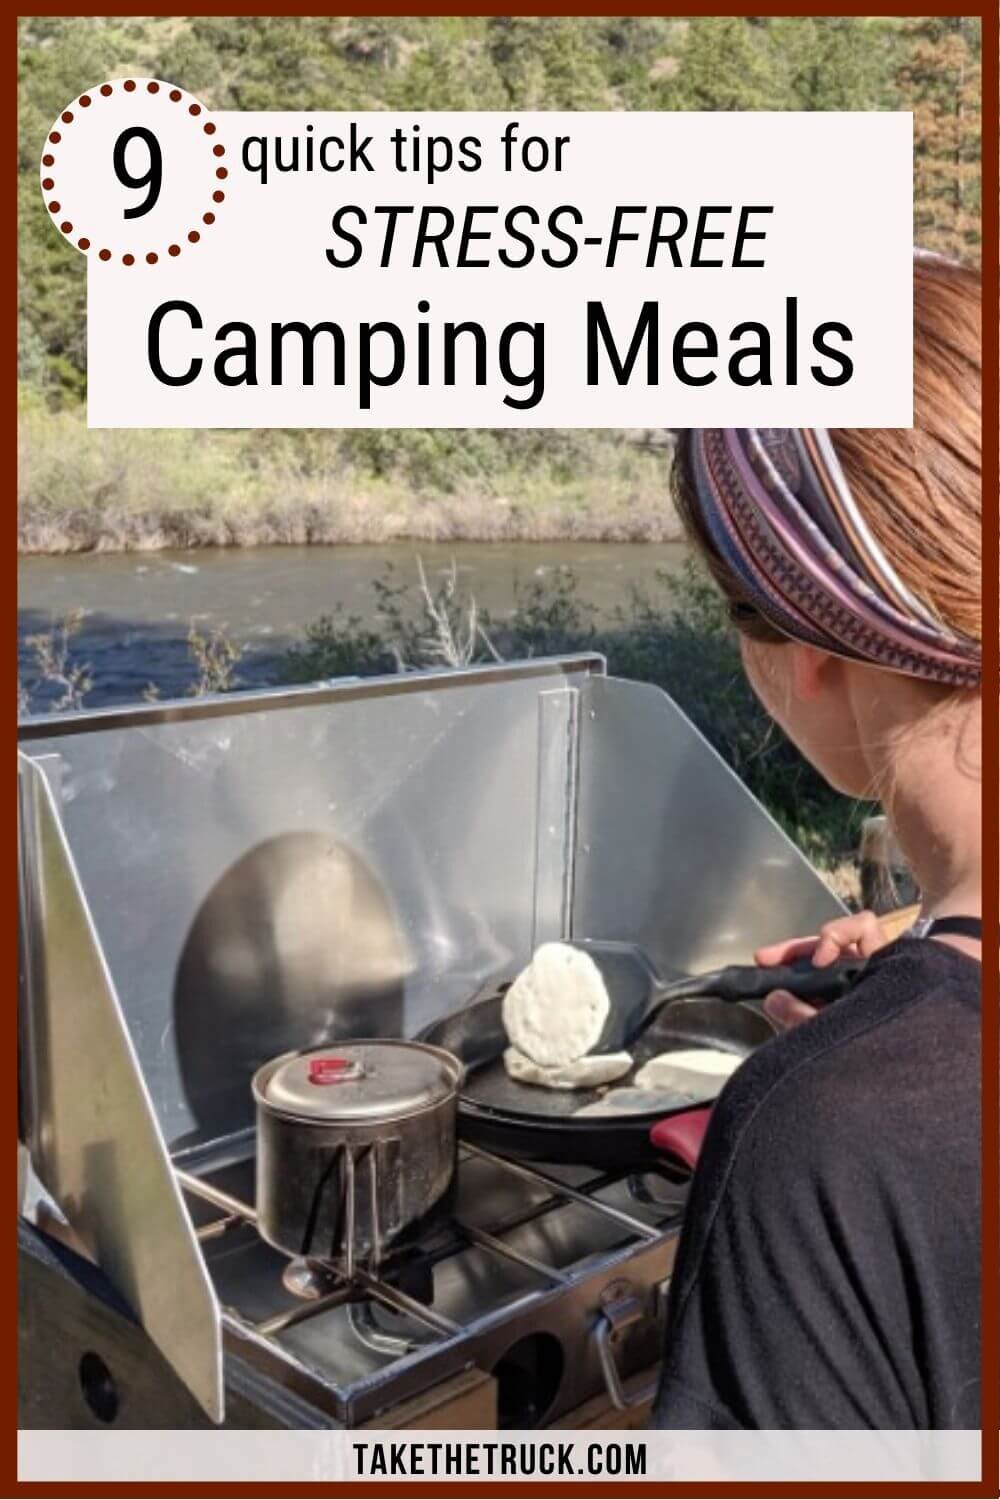 We’ve got 9 tips to get you started on planning and preparing easy camping meals for your next camping trip. During your adventure, you can have stress-free food options ready to go! 